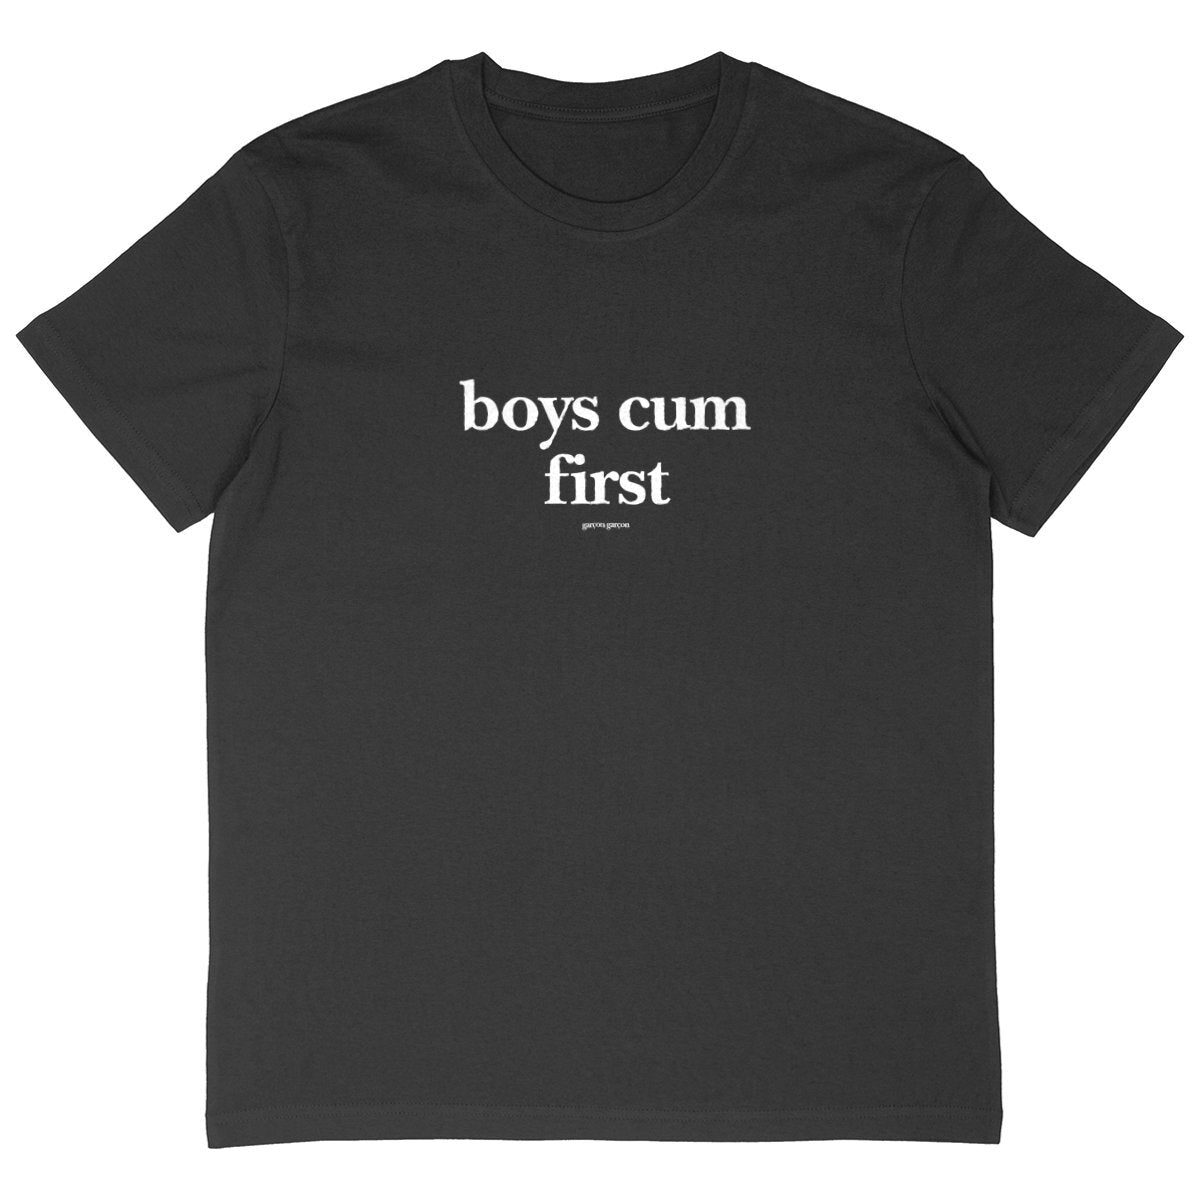 BOYS CUM FIRST OVERSIZED BLACK TEE. garçon garçon tee oversize BLACK. Dive into the essence of Parisian cool with this oversized tee. The subtle 'garçon garçon' signature whispers a chic narrative, offering a slice of the city's famed elegance. Perfect for those who speak style with simplicity.